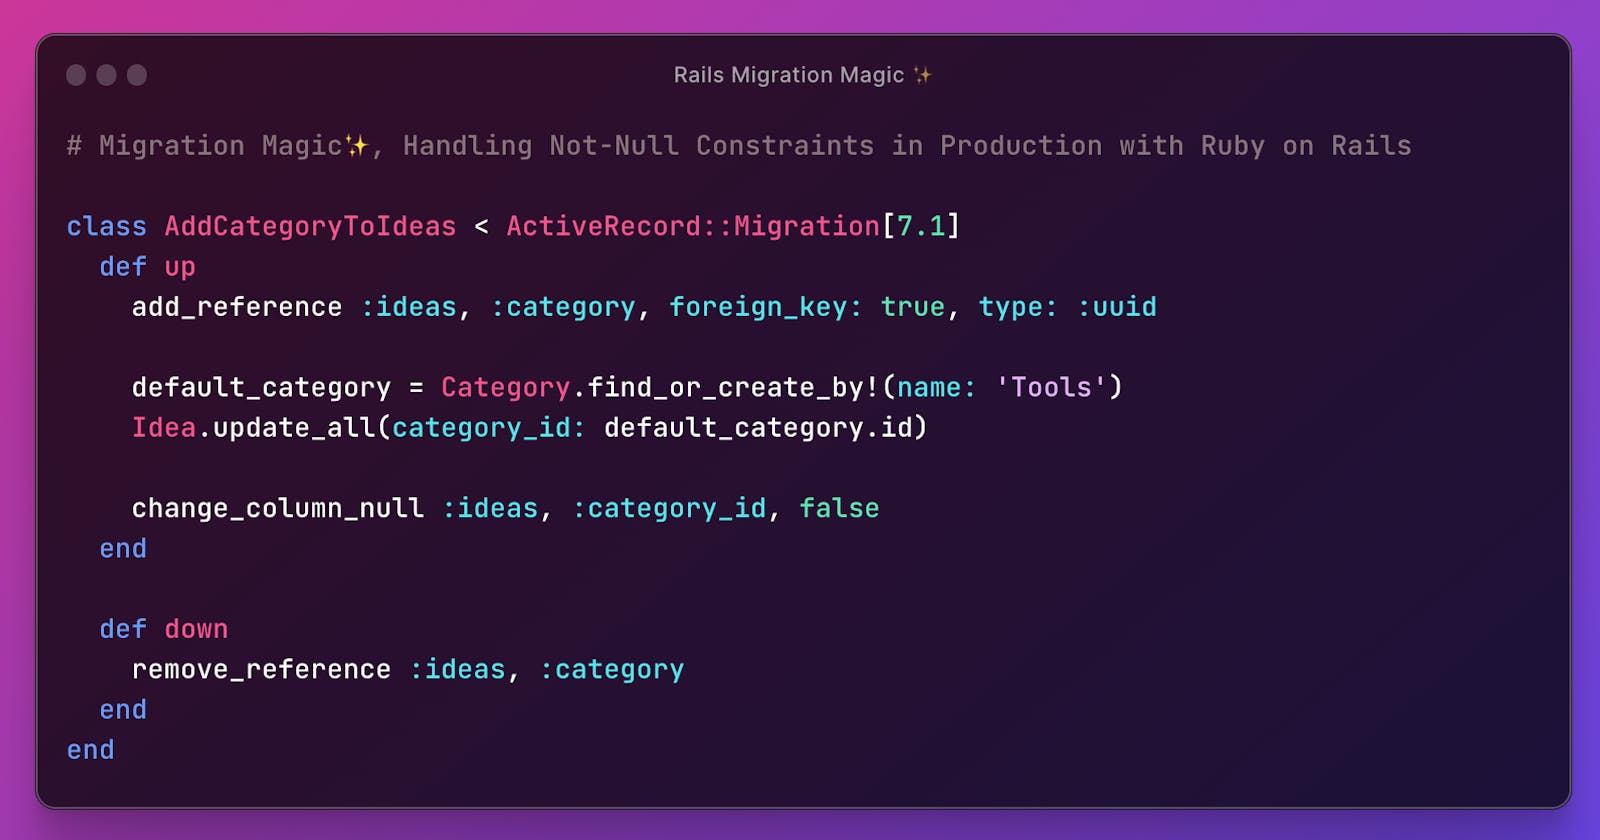 Migration Magic ✨, Handling Not-Null Constraints in Production with Ruby on Rails